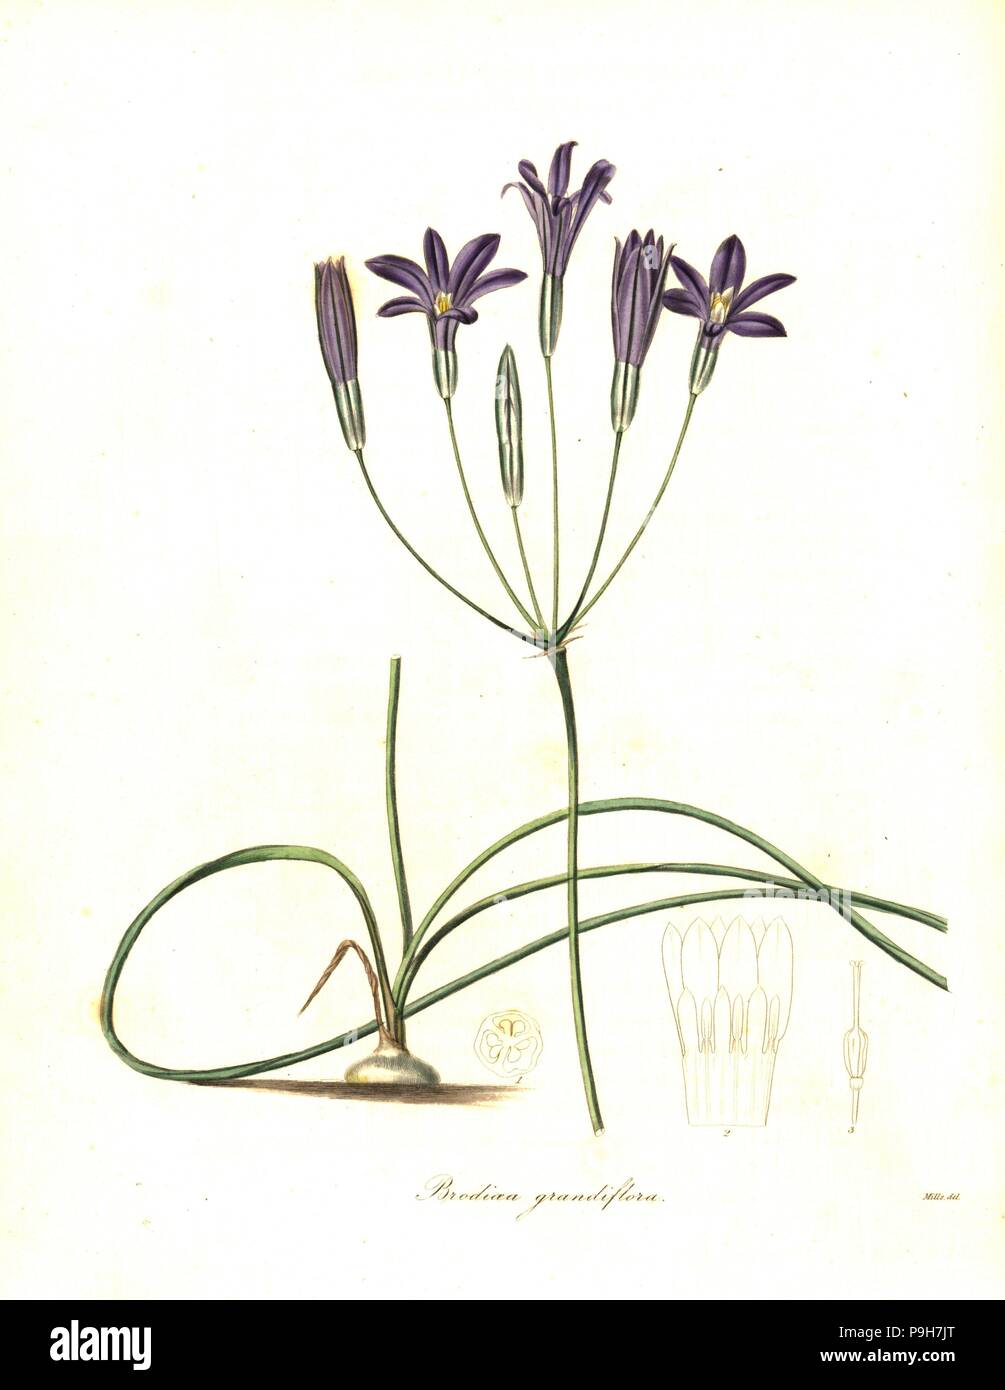 Crown brodiaea, Brodiaea coronaria (Large-flowered brodiaea, Brodiaea grandiflora). Handcoloured copperplate engraving after a botanical illustration by Mills from Benjamin Maund and the Rev. John Stevens Henslow's The Botanist, London, 1836. Stock Photo